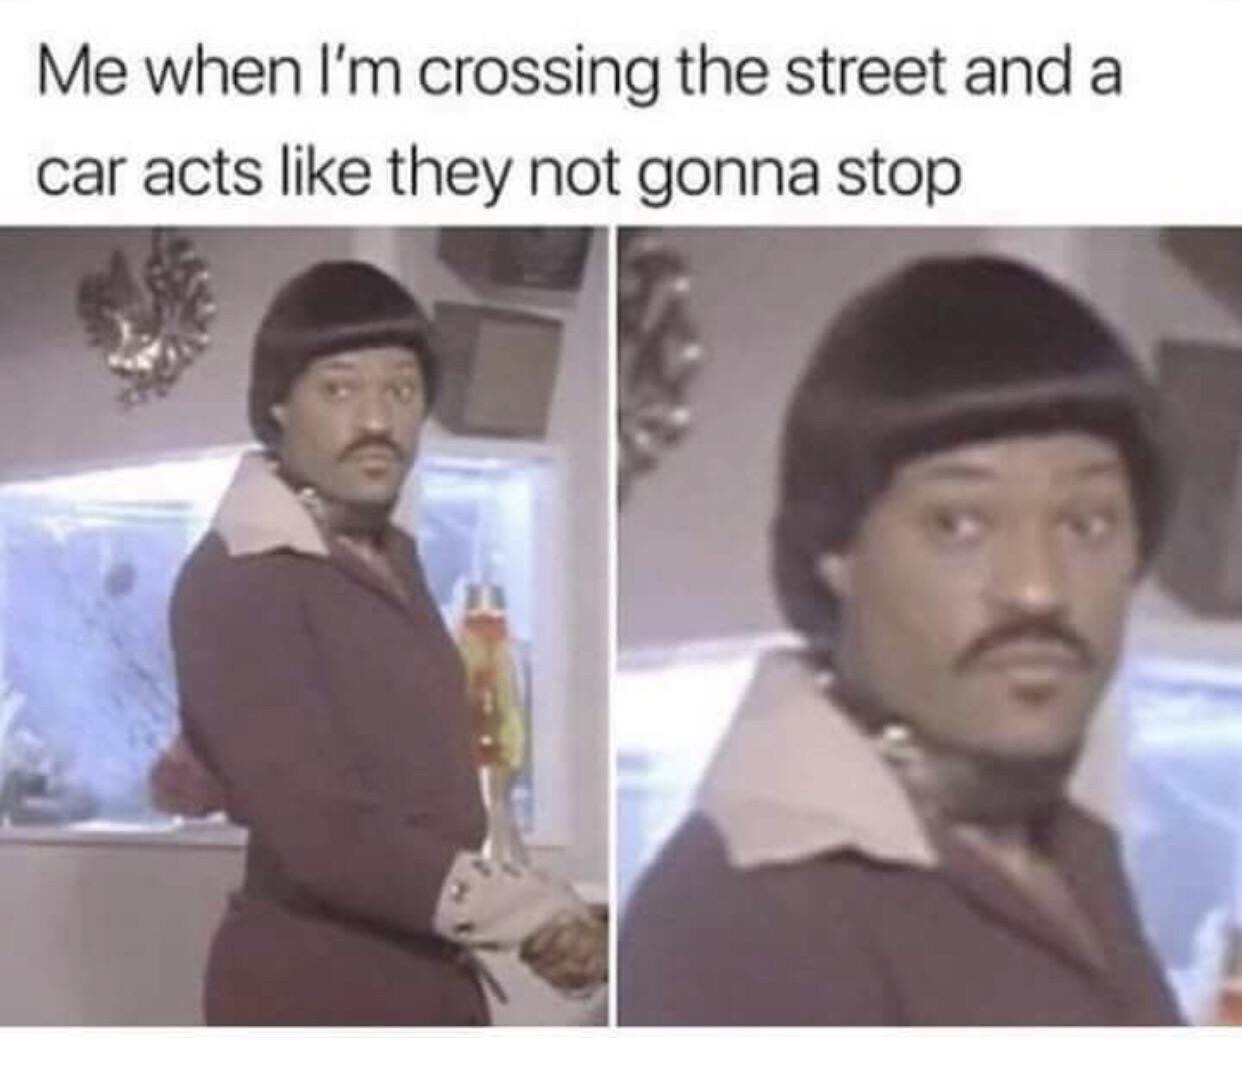 crossing the street meme - Me when I'm crossing the street and a car acts they not gonna stop